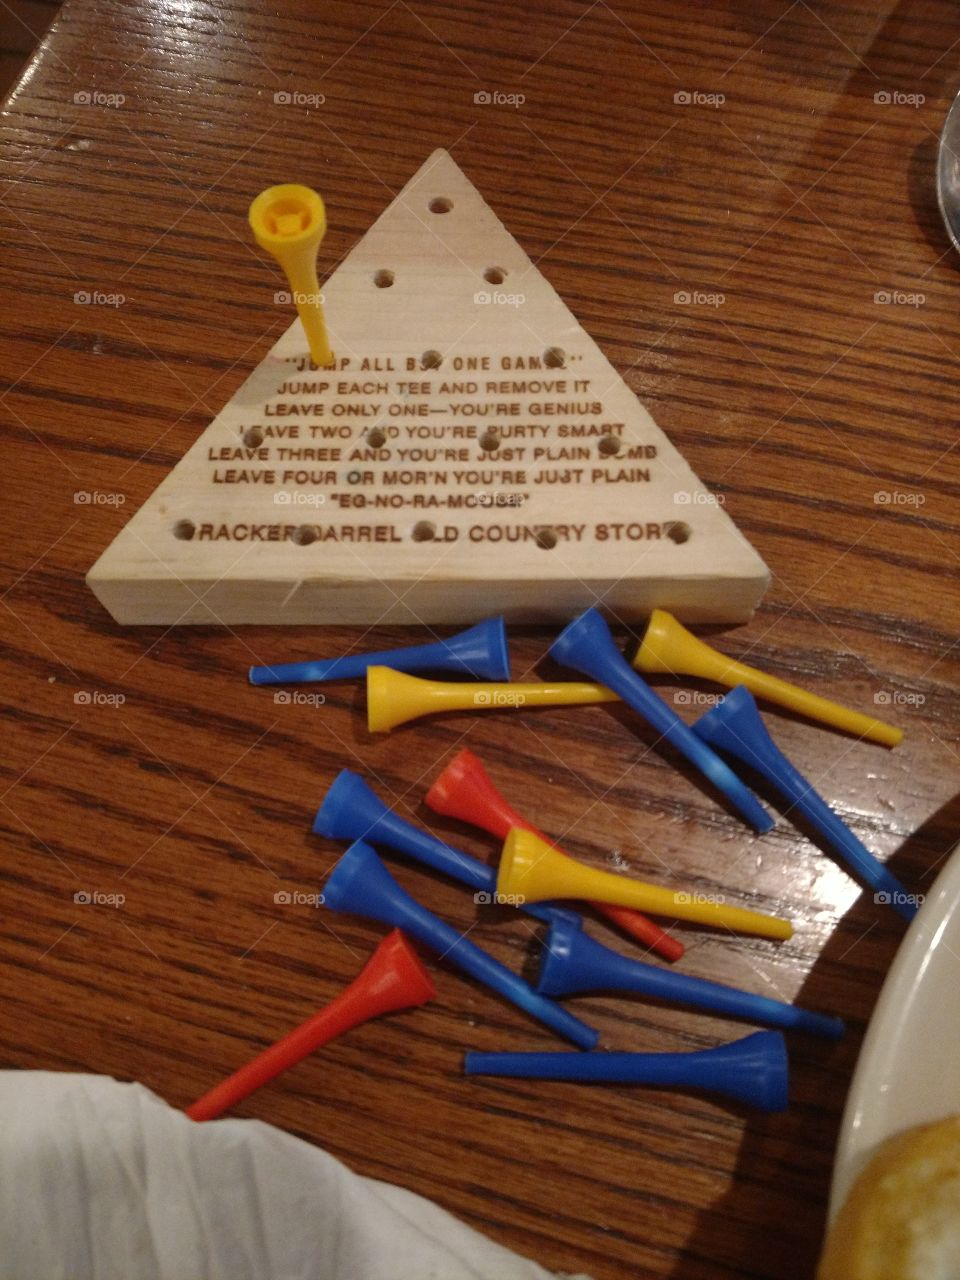 Genius! I finally did it! The Cracker Barrell game.